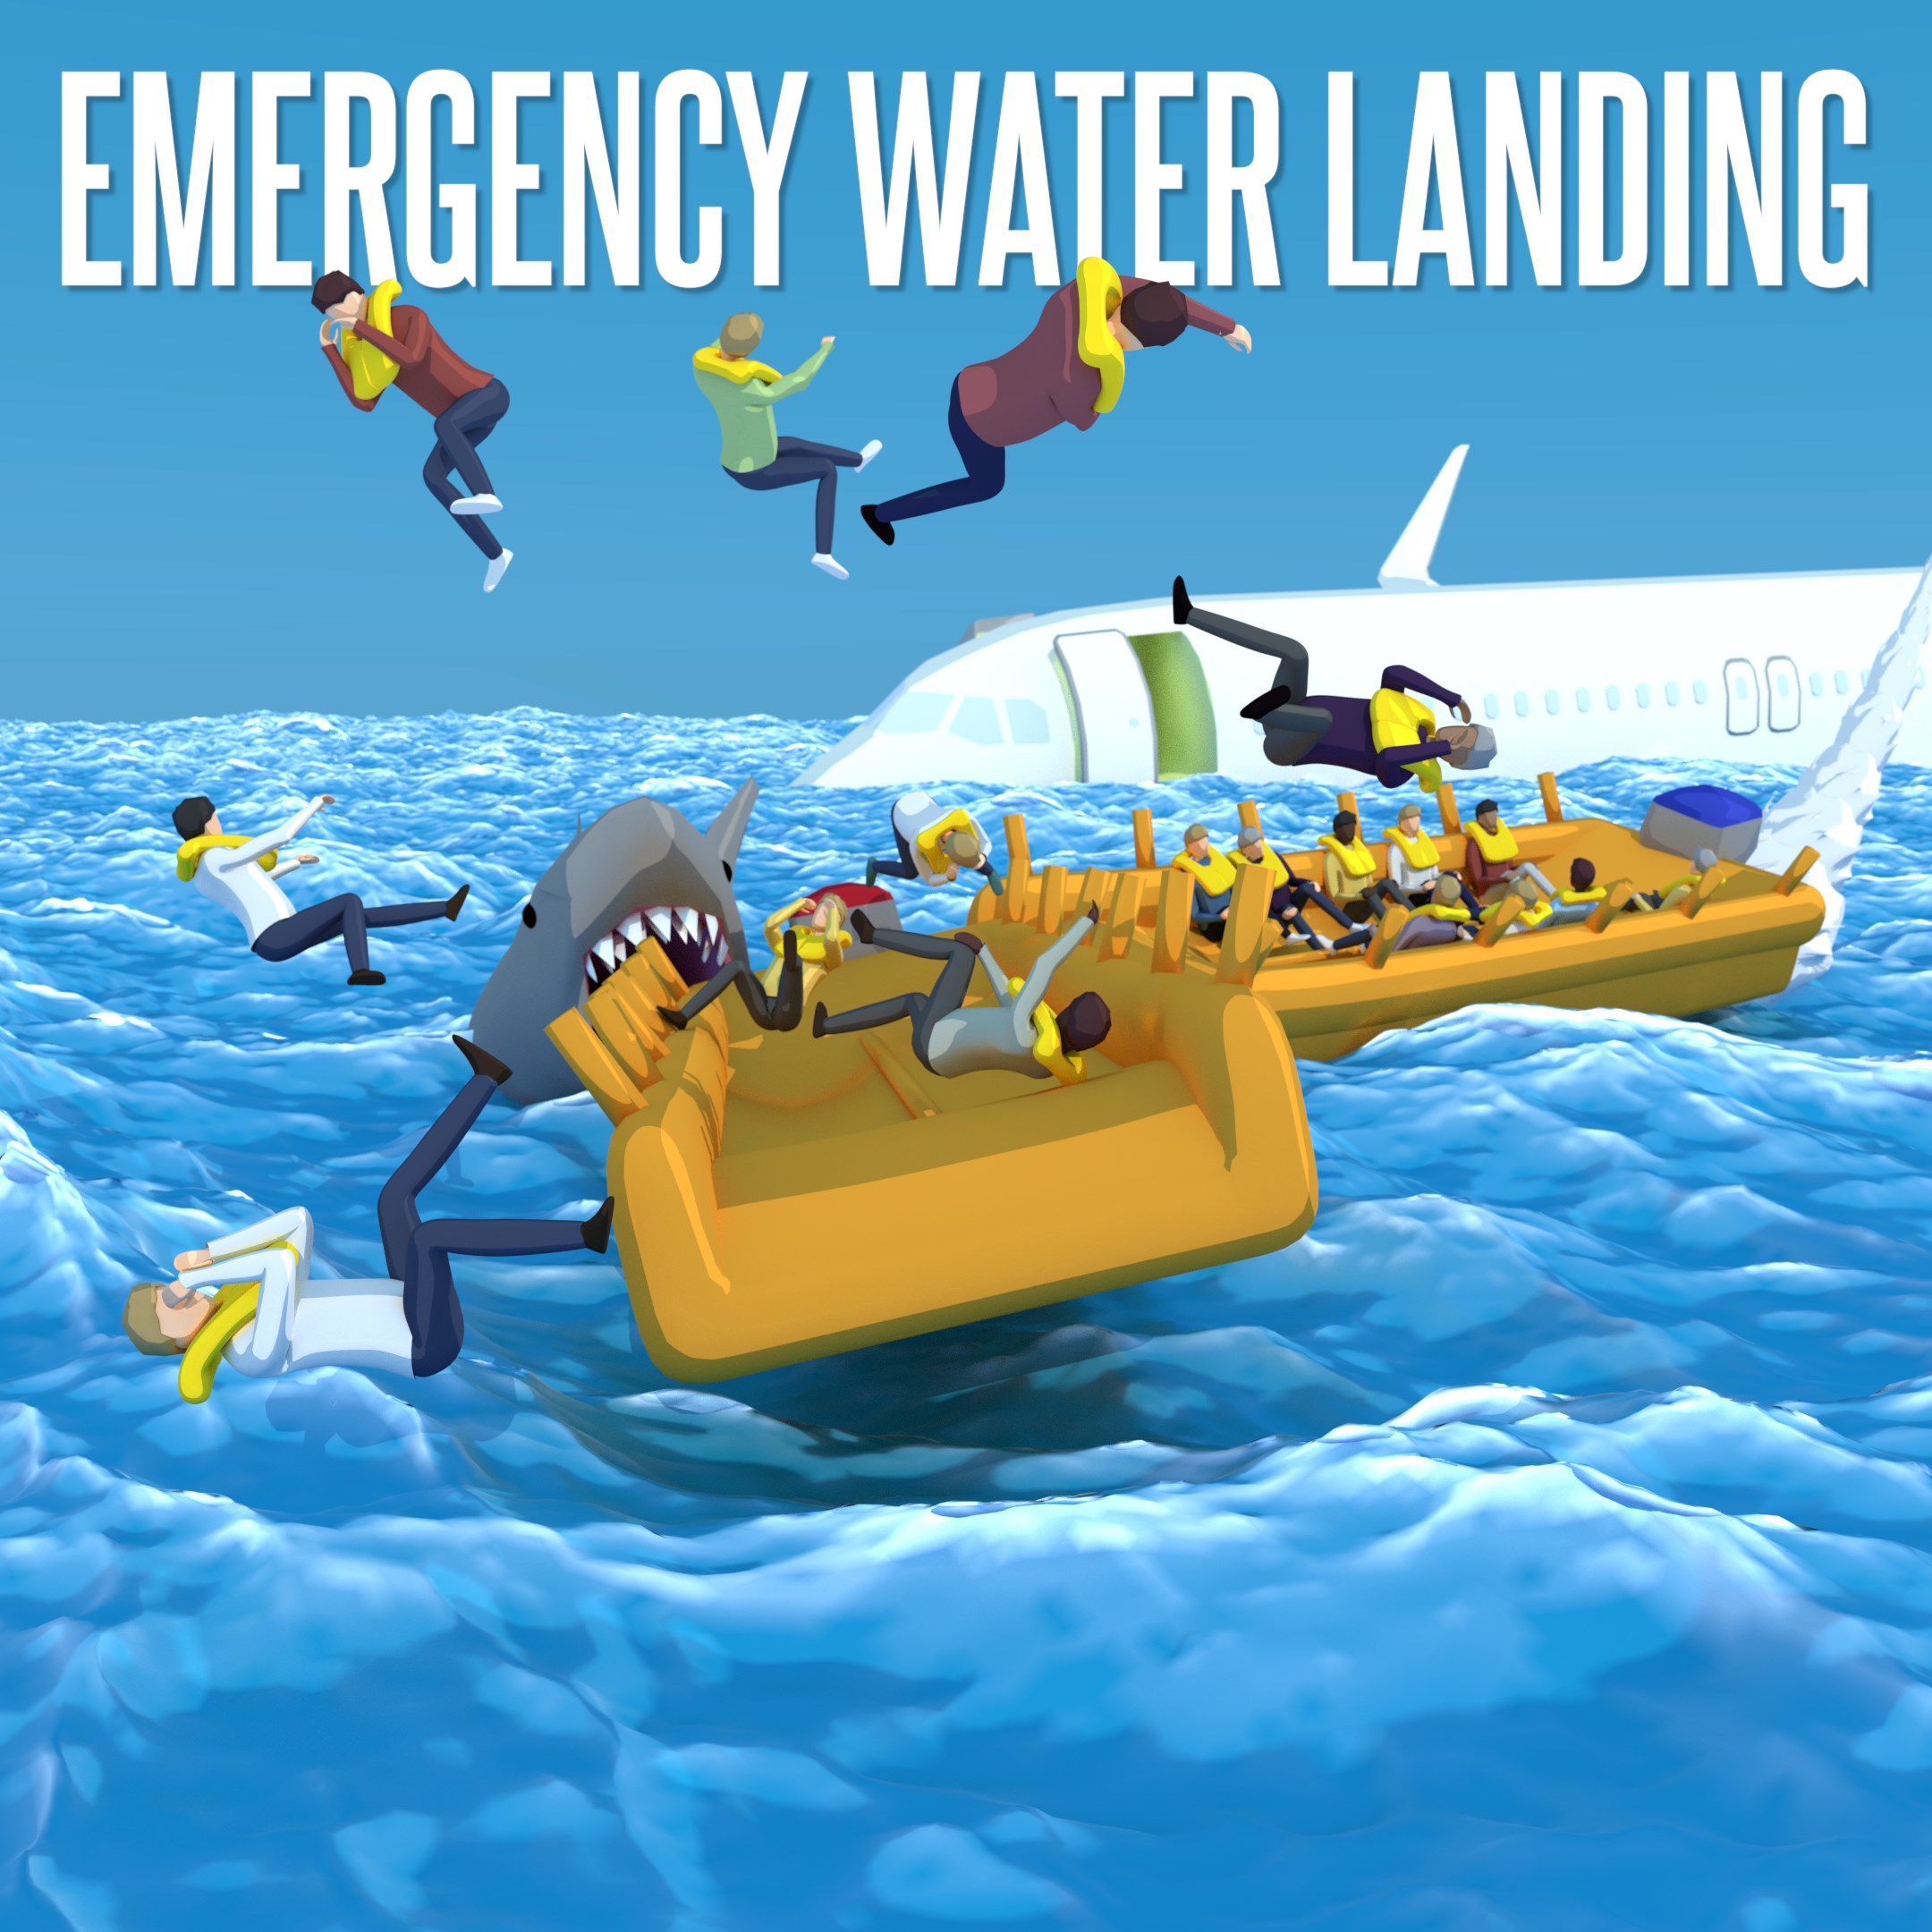 Emergency Water Landing technical specifications for laptop